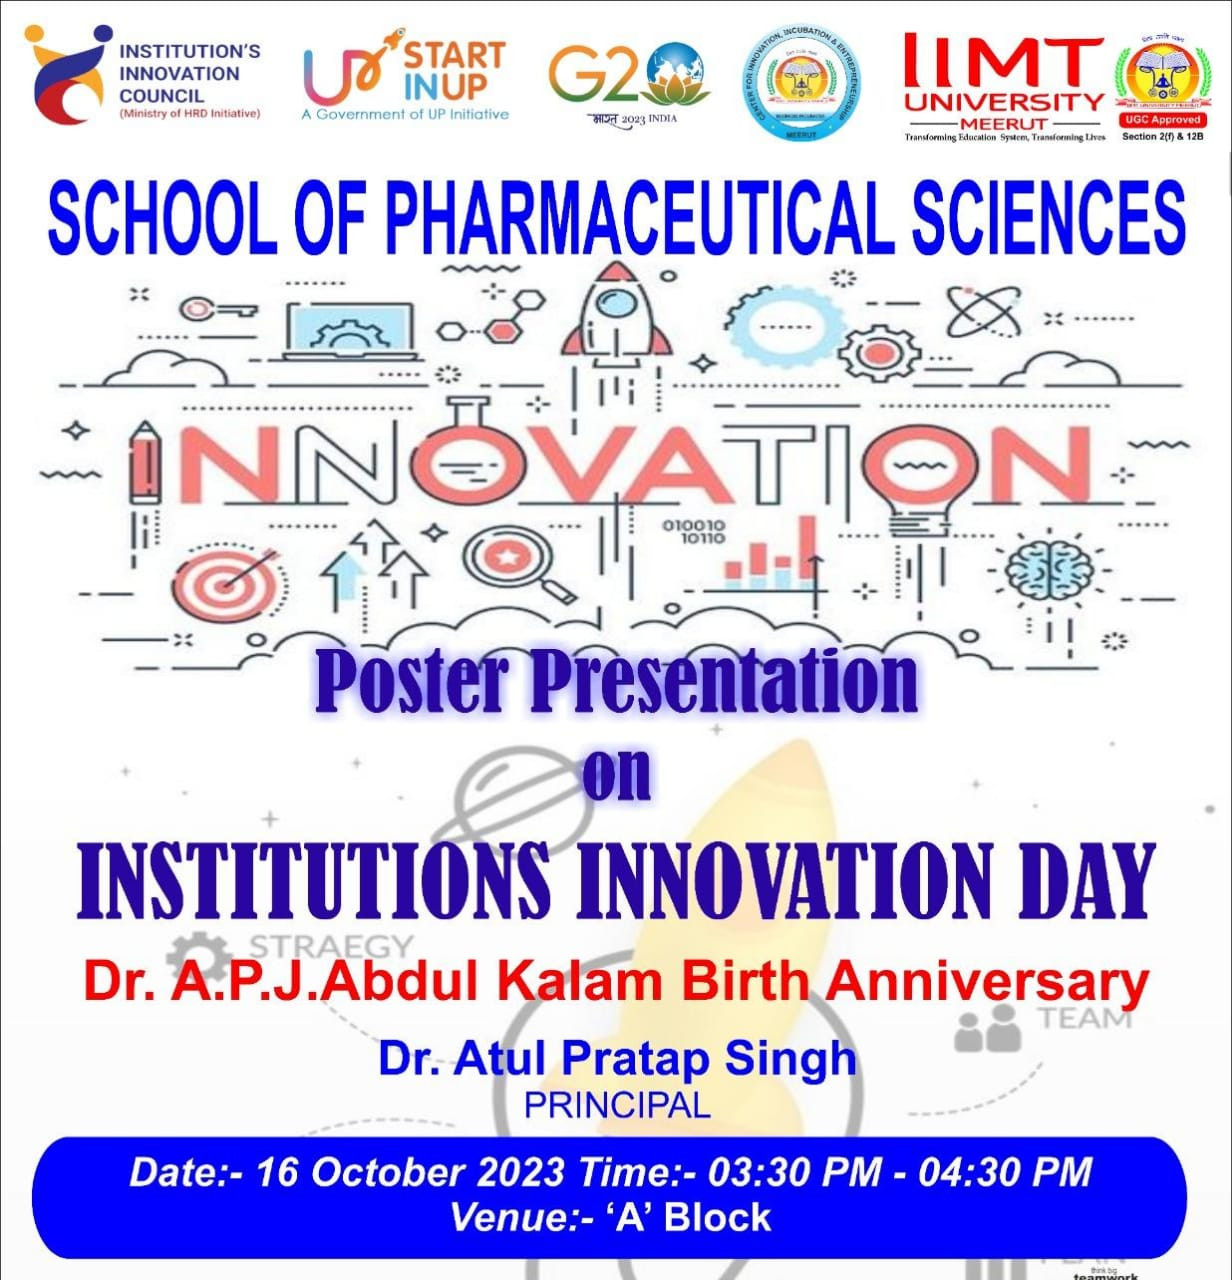  IIMT University Poster Presentation: Fostering Innovation and Creativity on Institutions Innovation Day